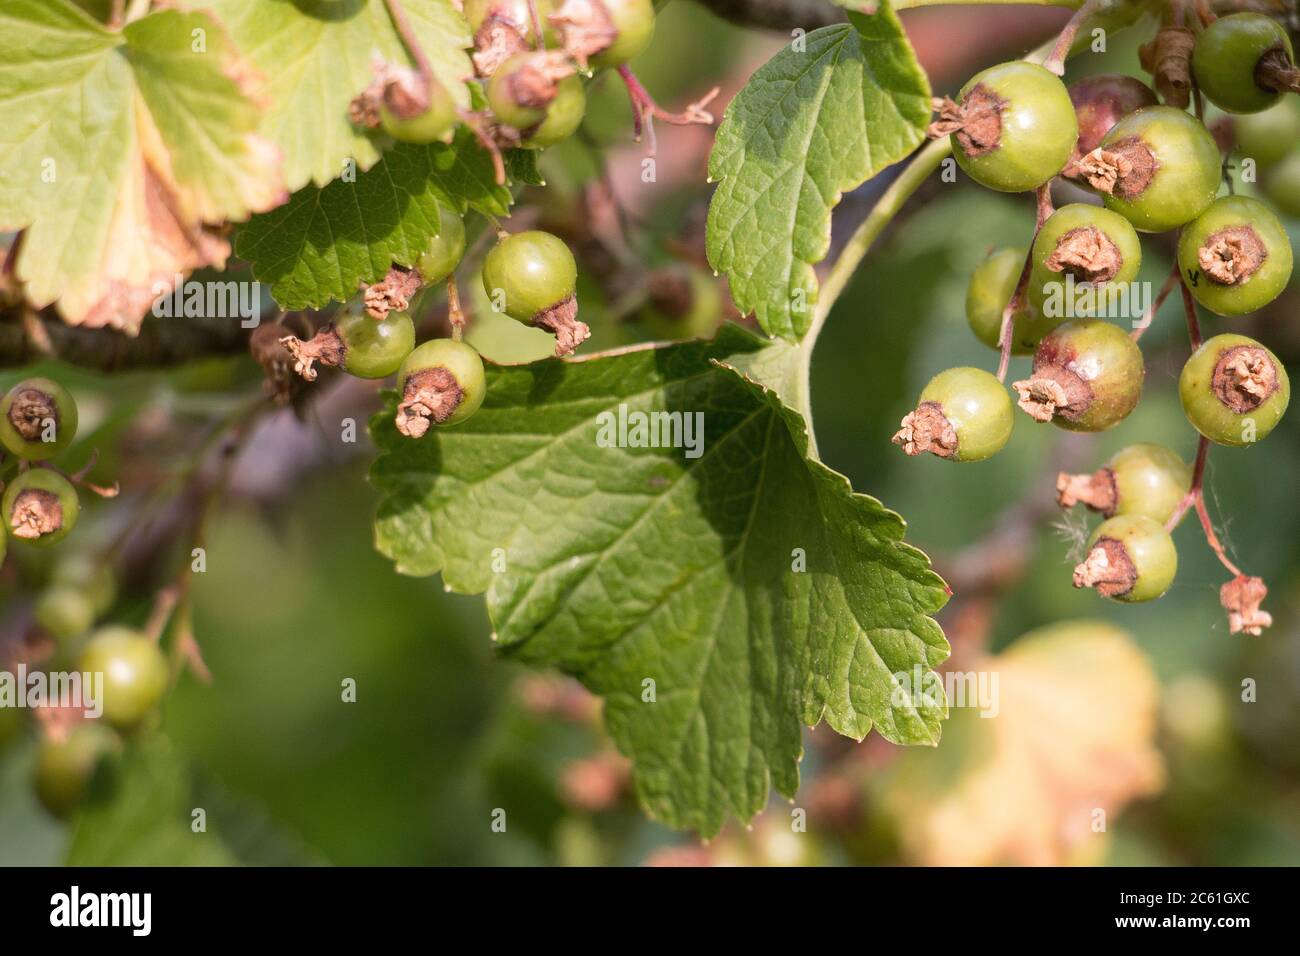 Green blackcurrant berries, Ribes nigrum, ripening on a black currant bush branch, natural green leaf background with selective focus Stock Photo